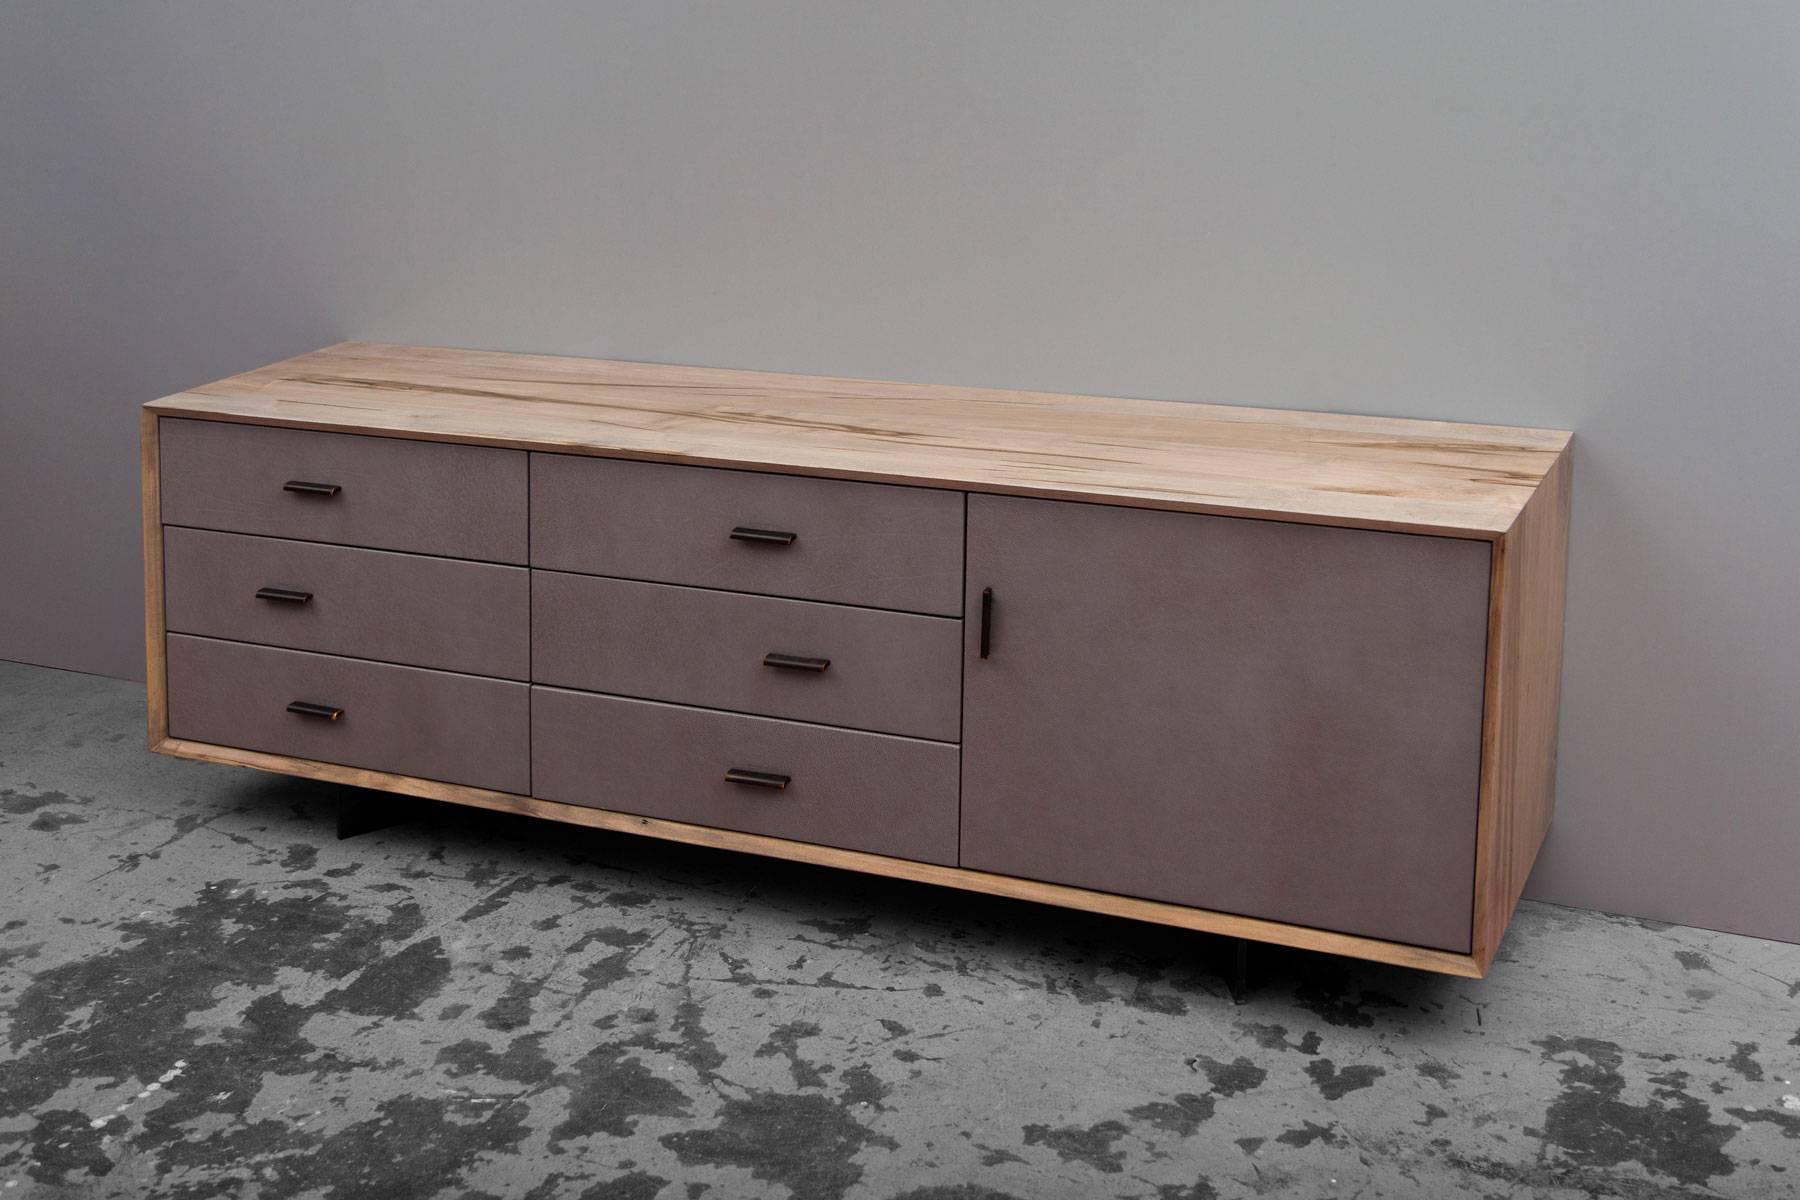 The Sentient Murlough Dresser is a refined storage piece that uses locally-sourced American maple. Each dresser is handmade to order in Brooklyn. The unique grain and characteristics of the wood created during the growth process in the forests of